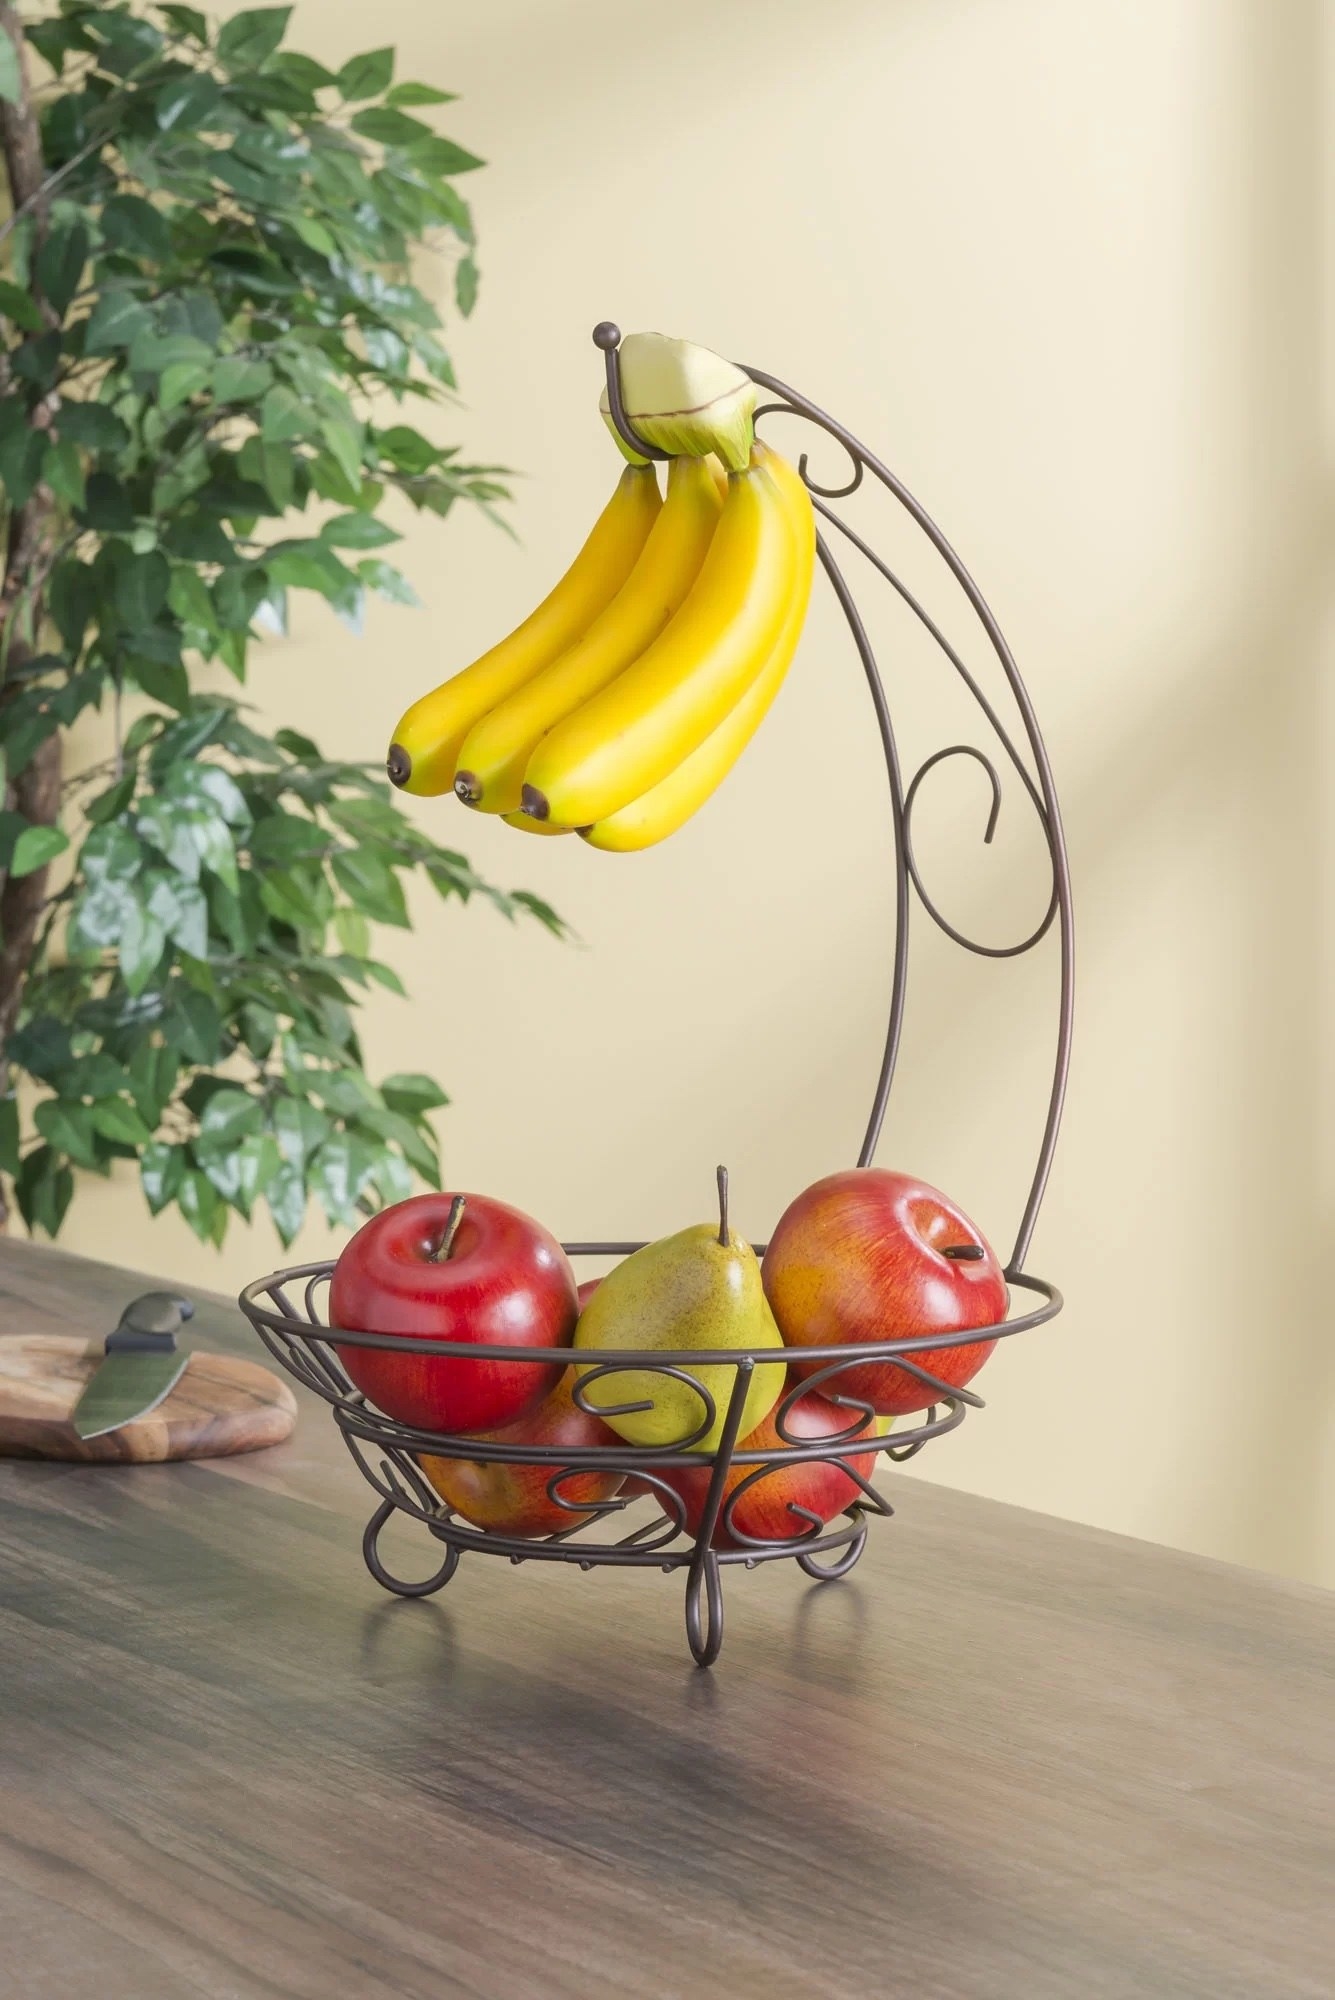 a banana holder holding bananas and apples and pears